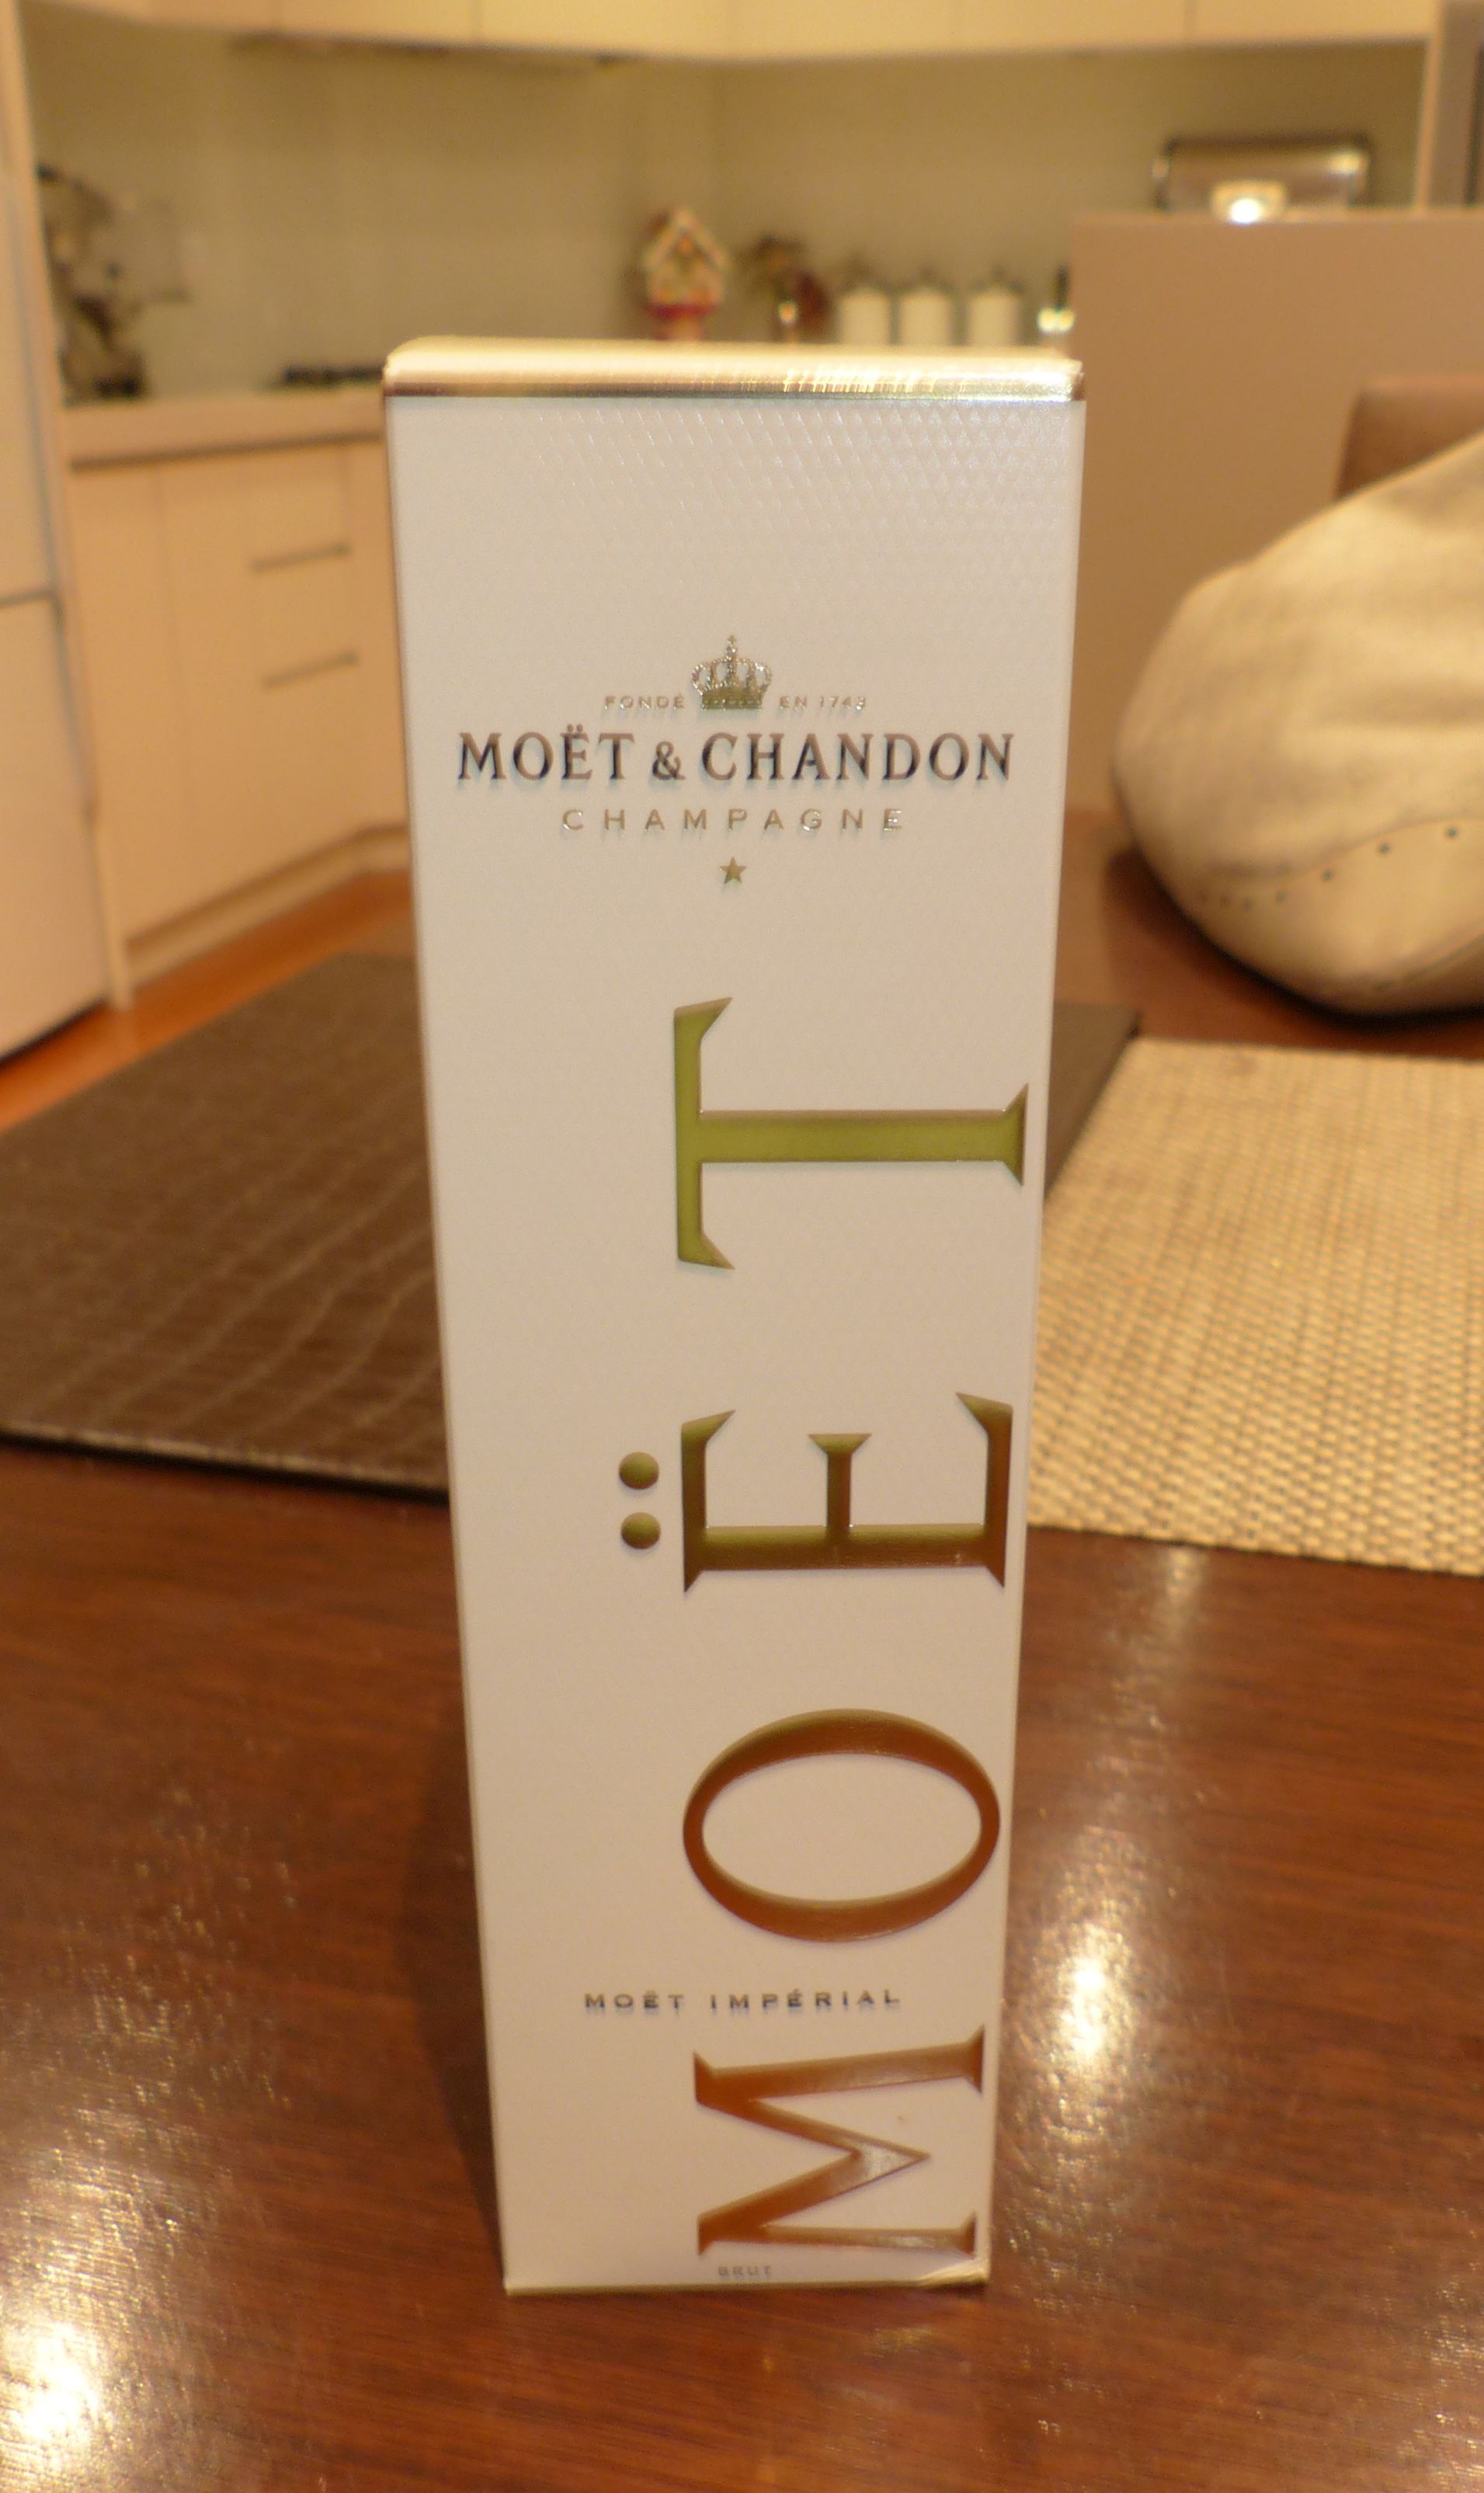 A mini bottle of Moet - my favourite champagne!